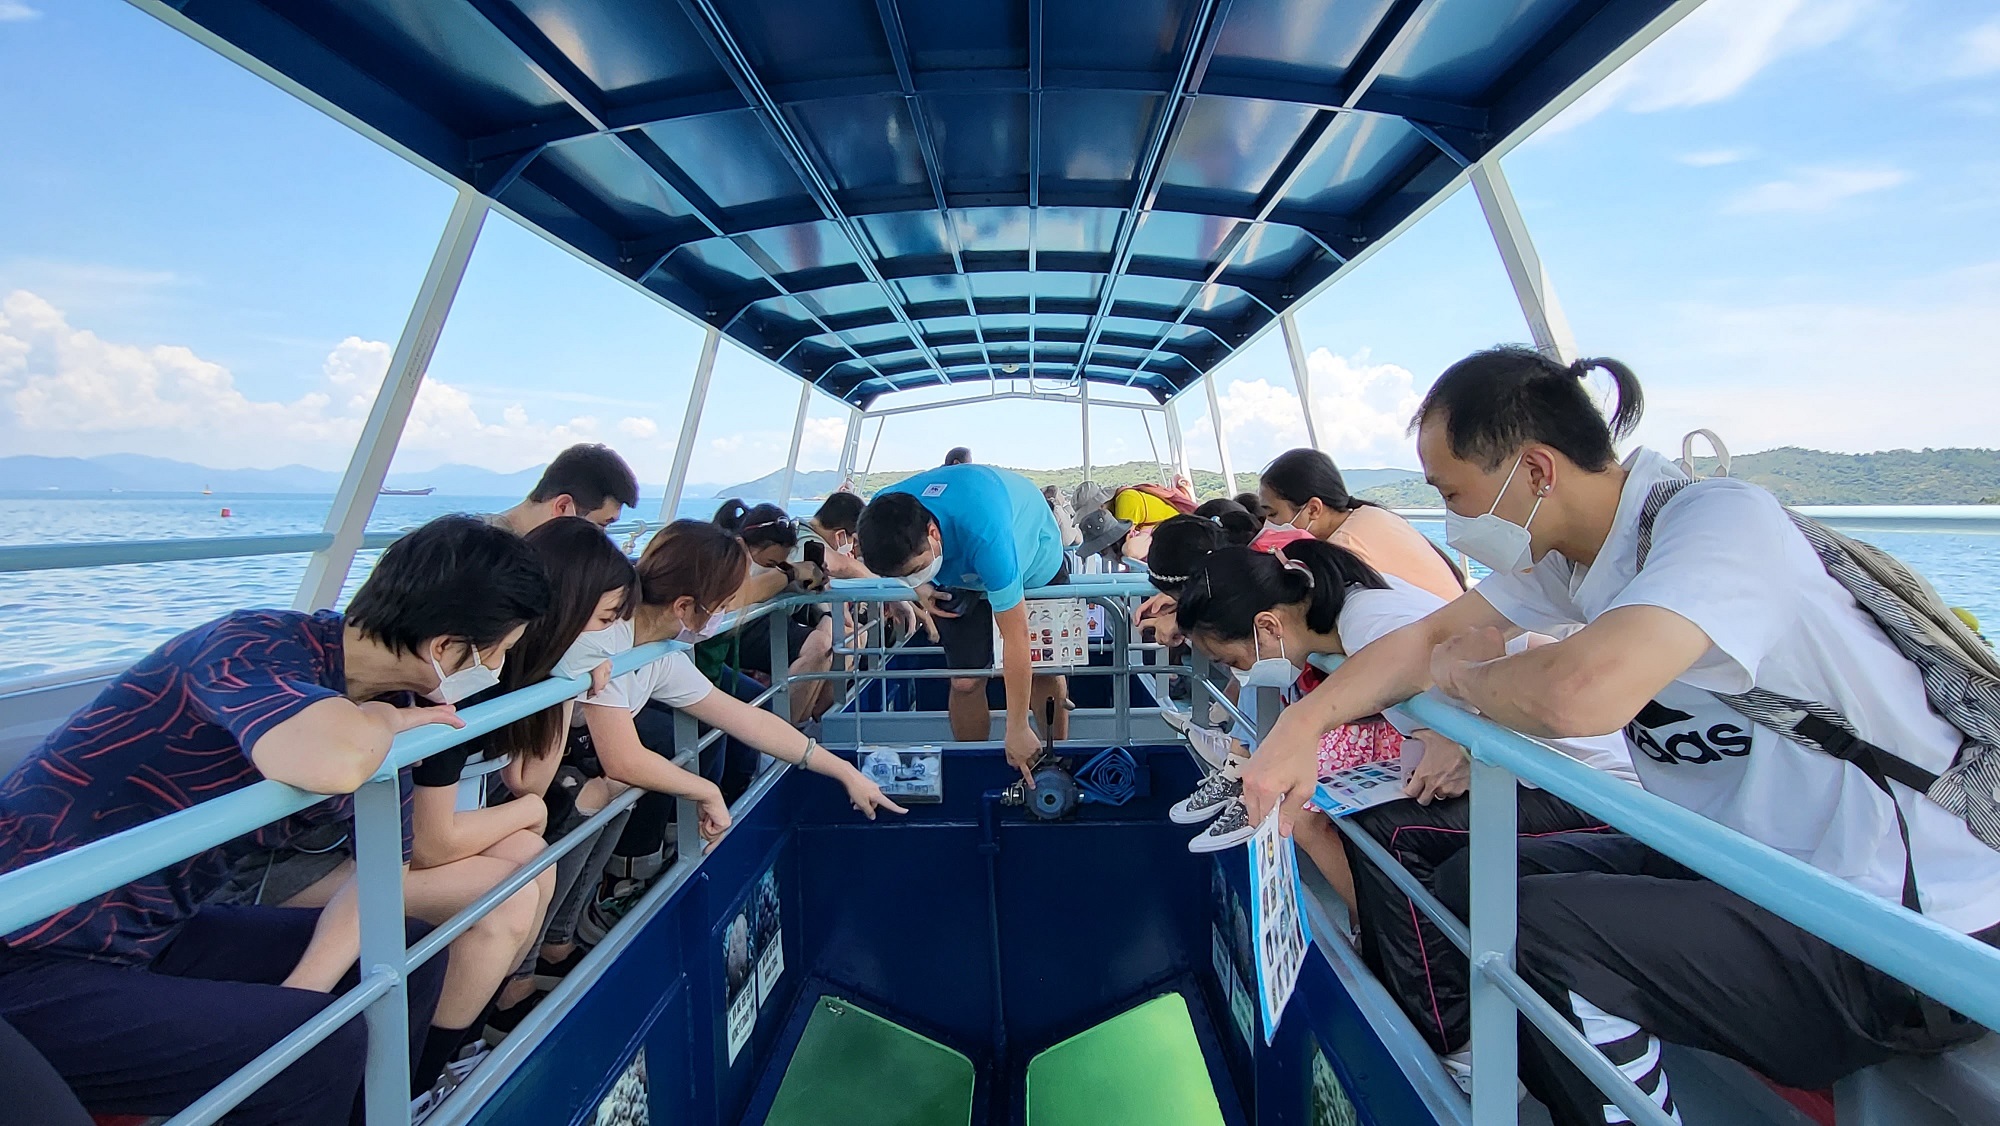 We participated in activities organised by WWF-Hong Kong, such as the Marine Education Programme, to understand the importance of natural ecology and environmental protection.